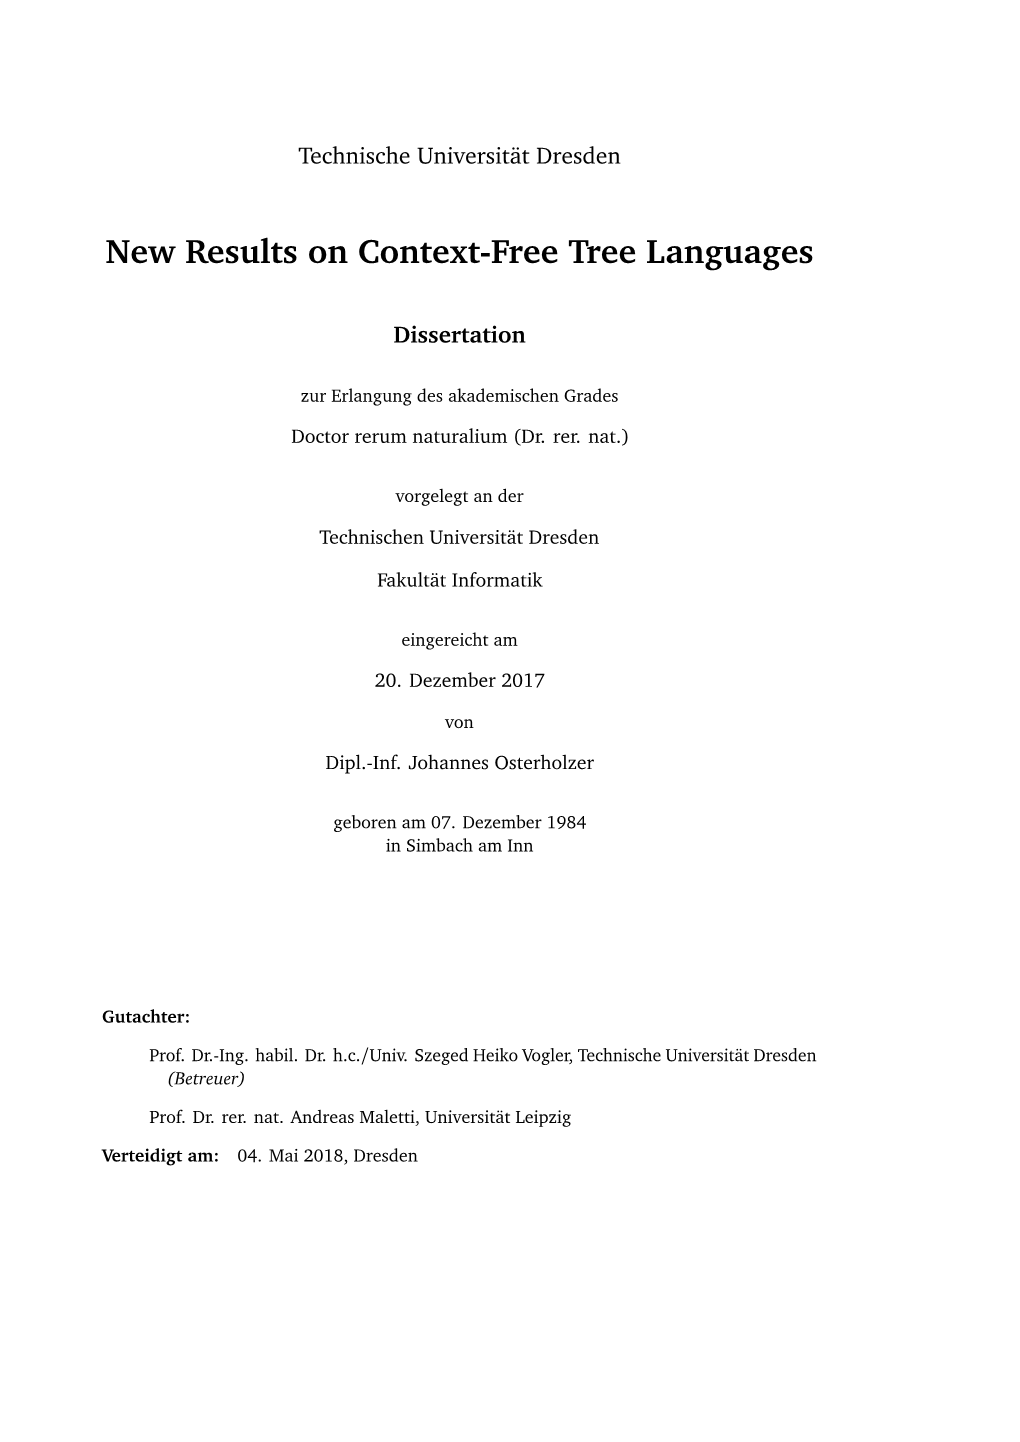 New Results on Context-Free Tree Languages